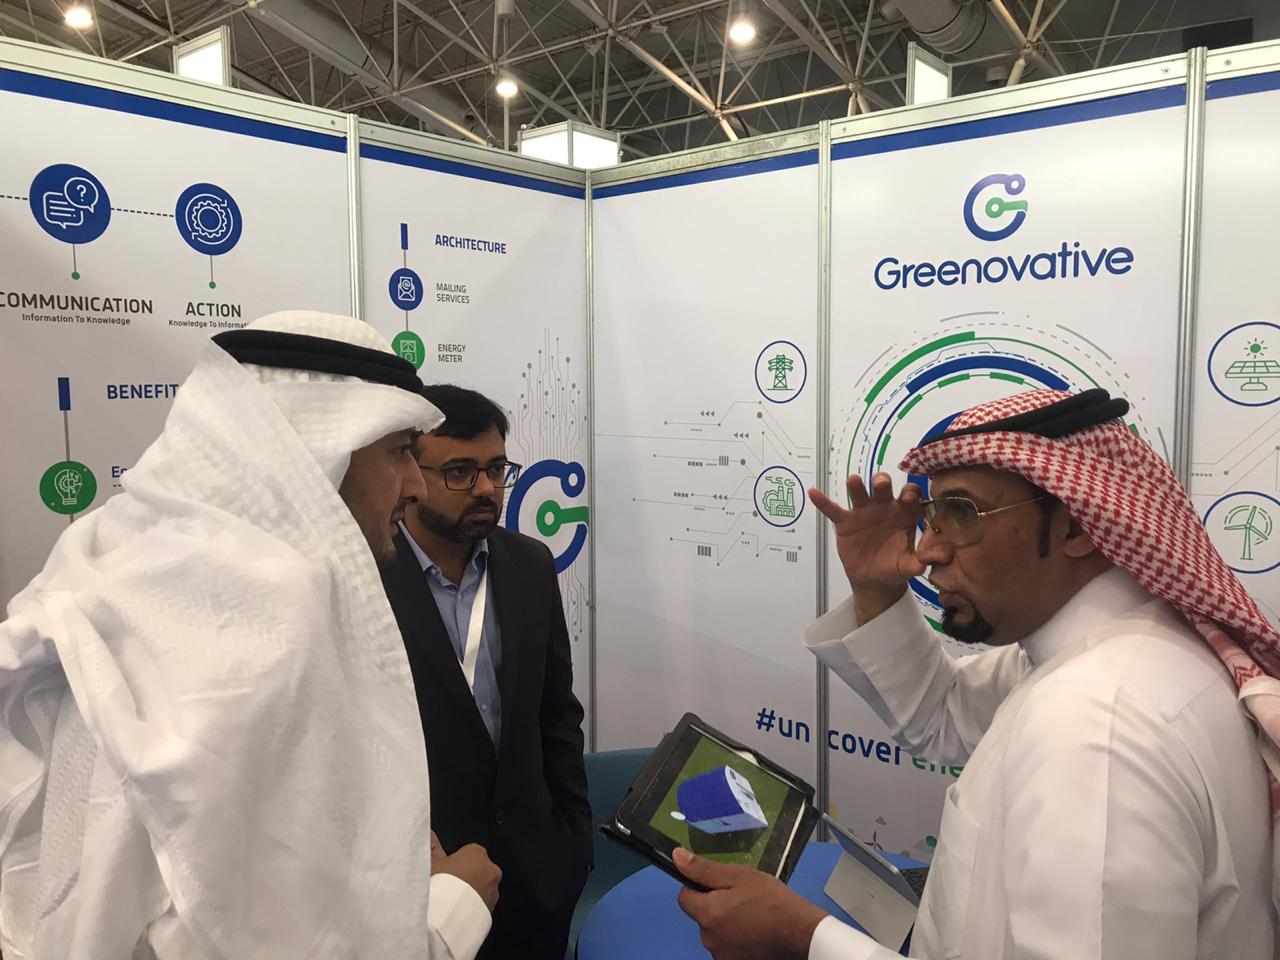 Greenovative Stands Out as a Fluent Exhibitor in the Saudi IoT Event